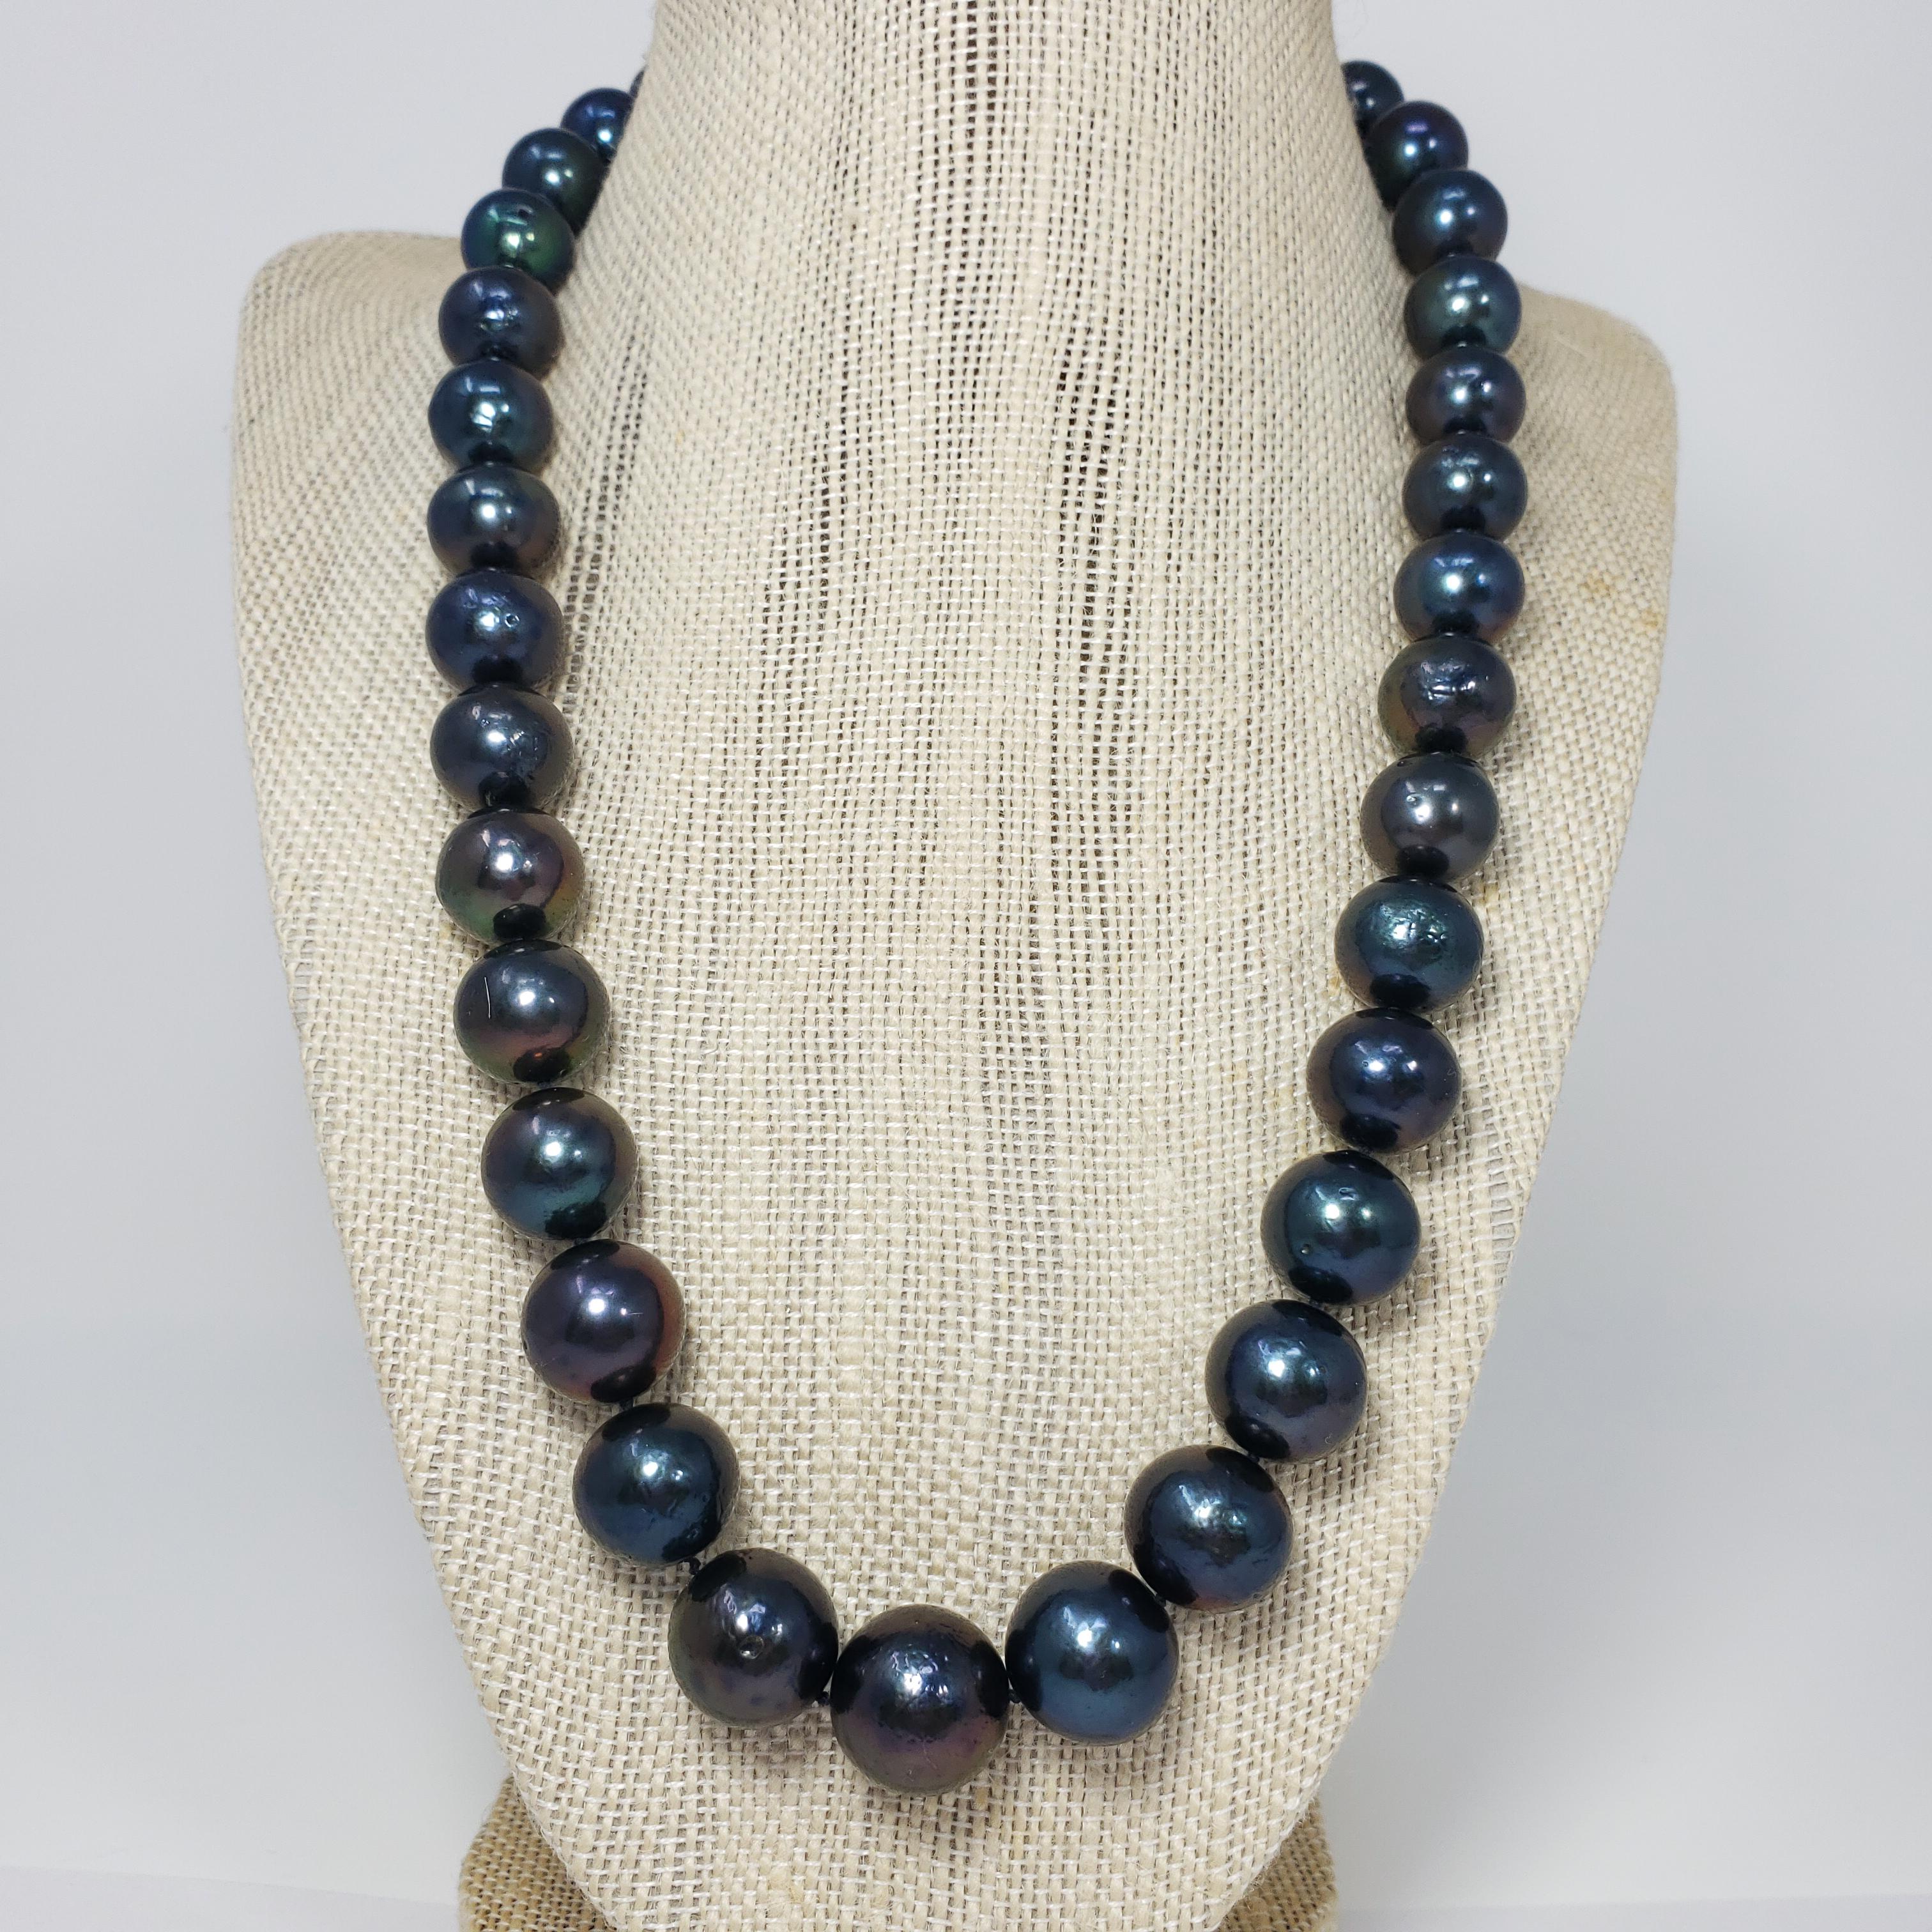 Blue-Green Tahitian Pearl Beaded Necklace with Sterling Silver Clasp ...